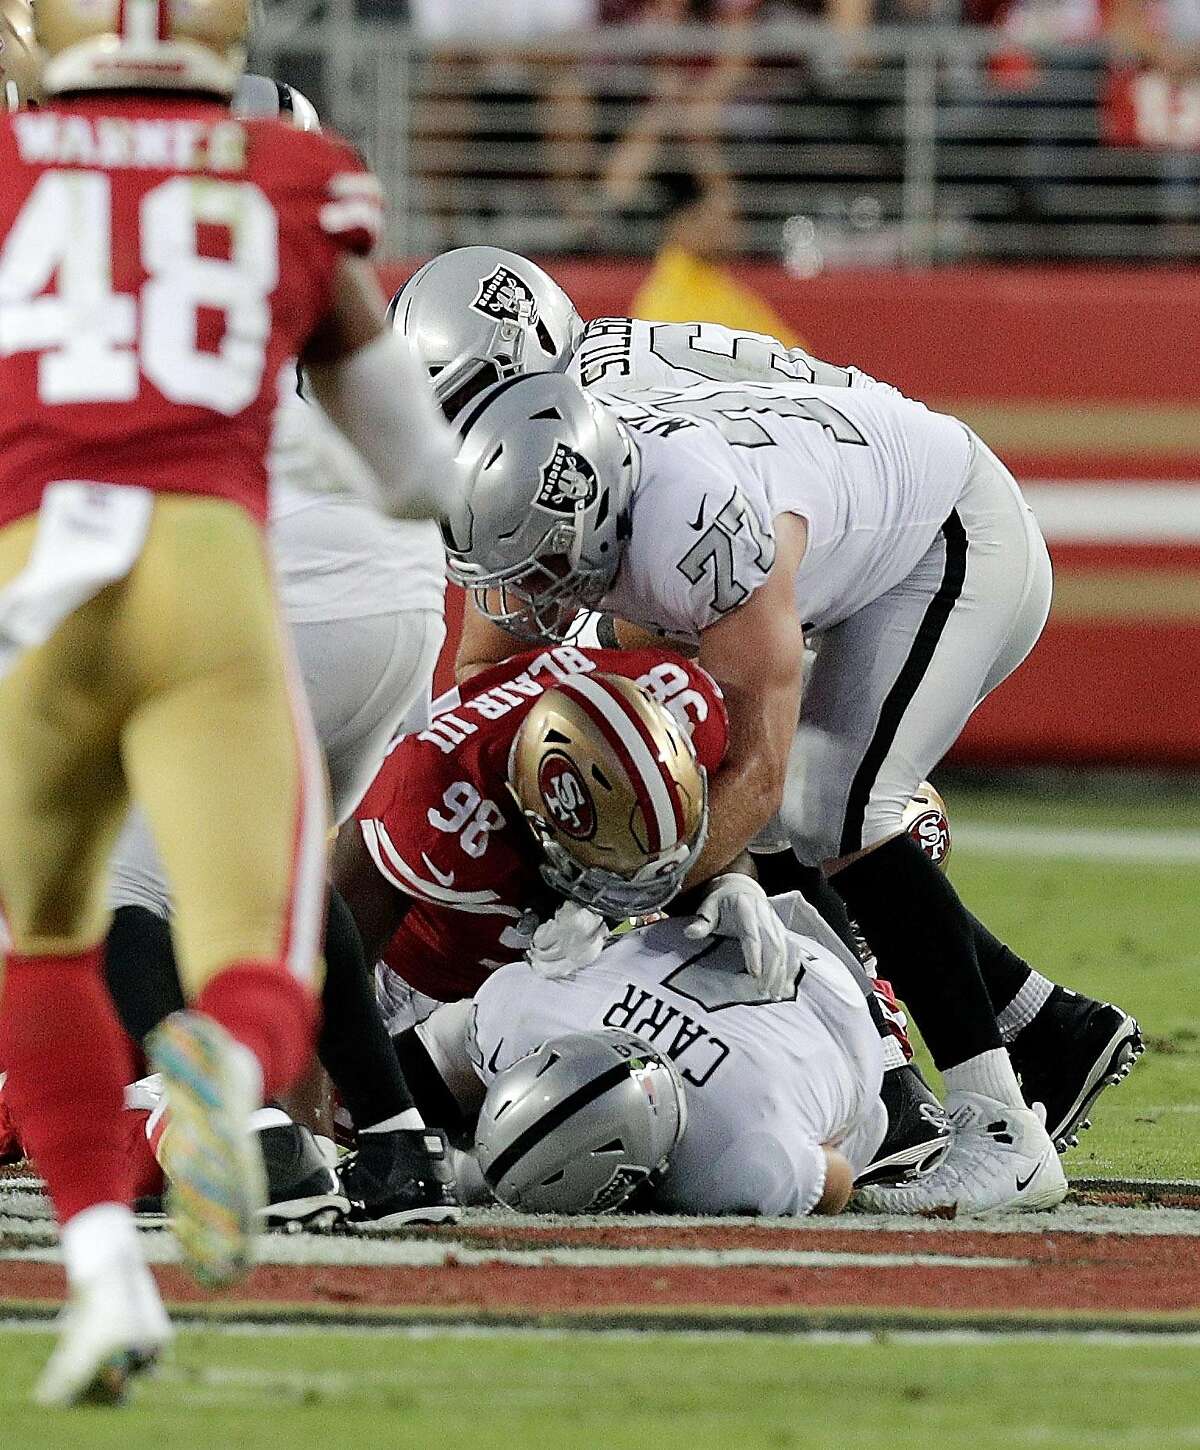 Derek Carr (4) is sacked in the second quarter as the San Francisco 49ers played the Oakland Raiders at Levi's Stadium in Santa Clara, Calif., on Thursday, November 1, 2018.